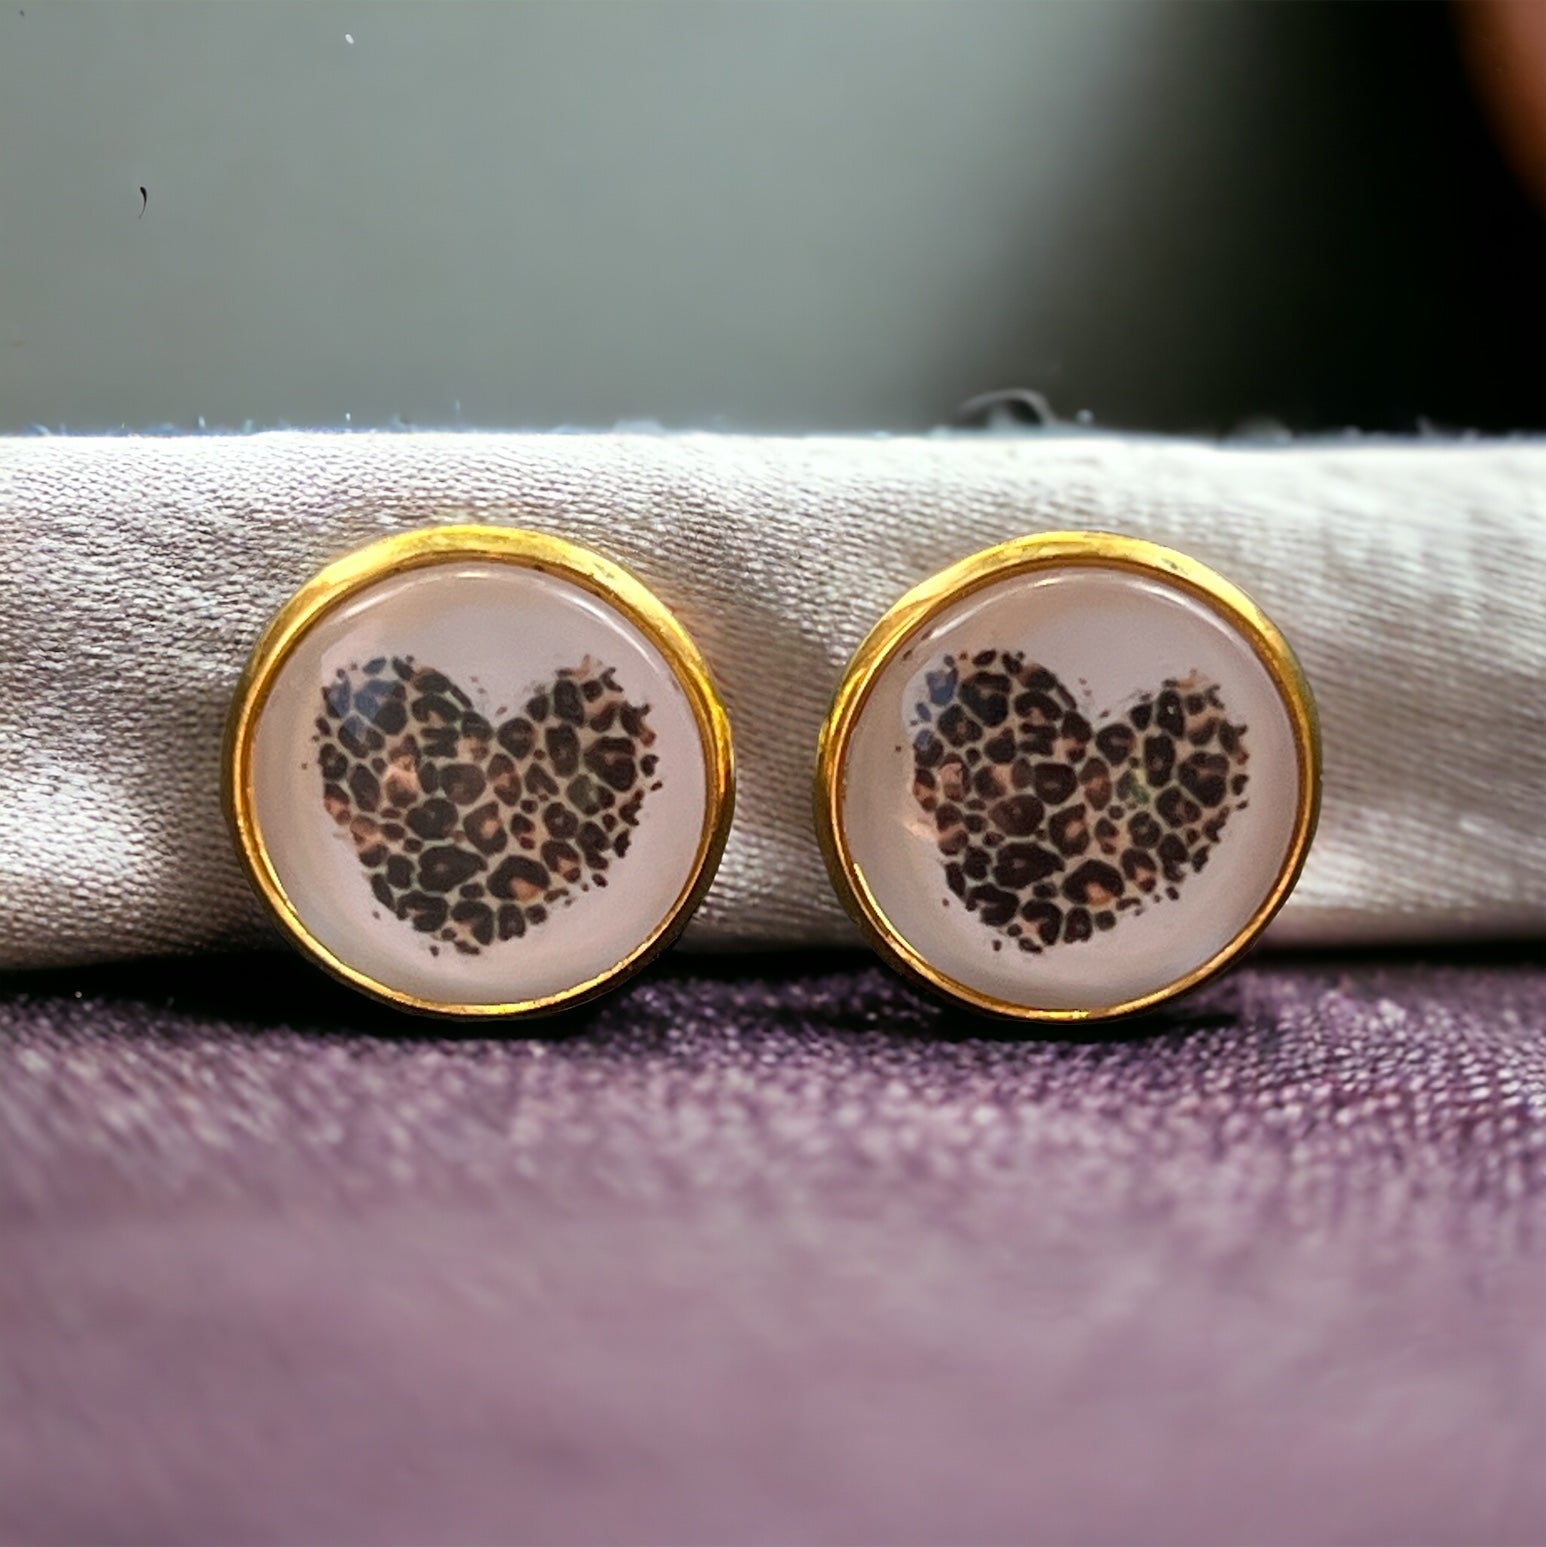 Animal Print Heart Gold Stud Earrings - Chic & Playful Accessories